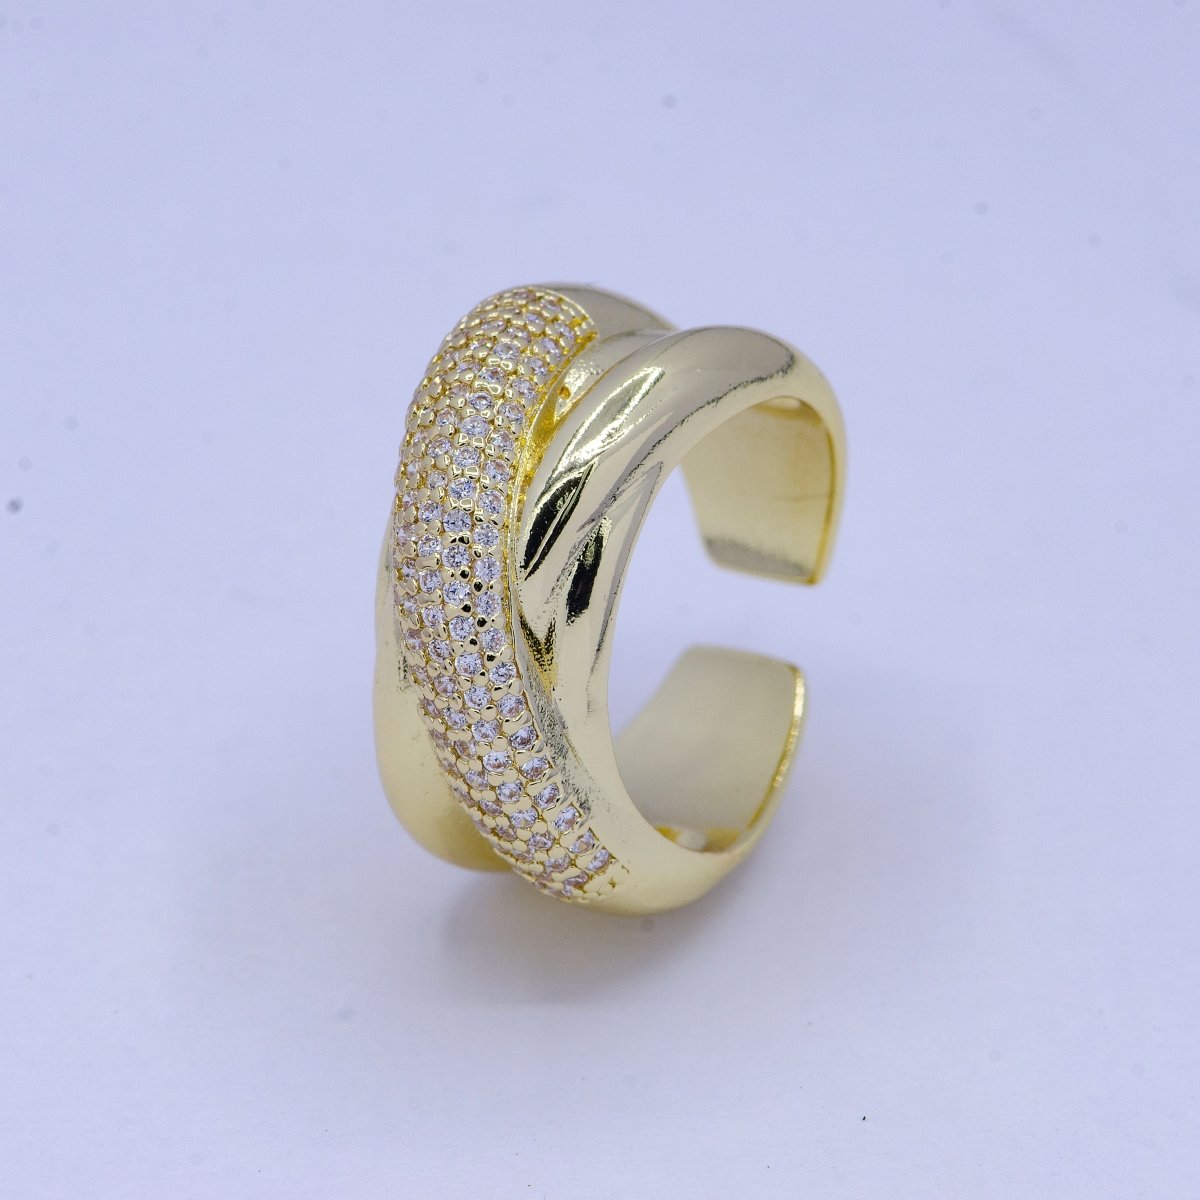 Chunky Criss Cross CZ Ring in 24k Gold Filled For Statement Jewelry O-2116 O-2117 - DLUXCA